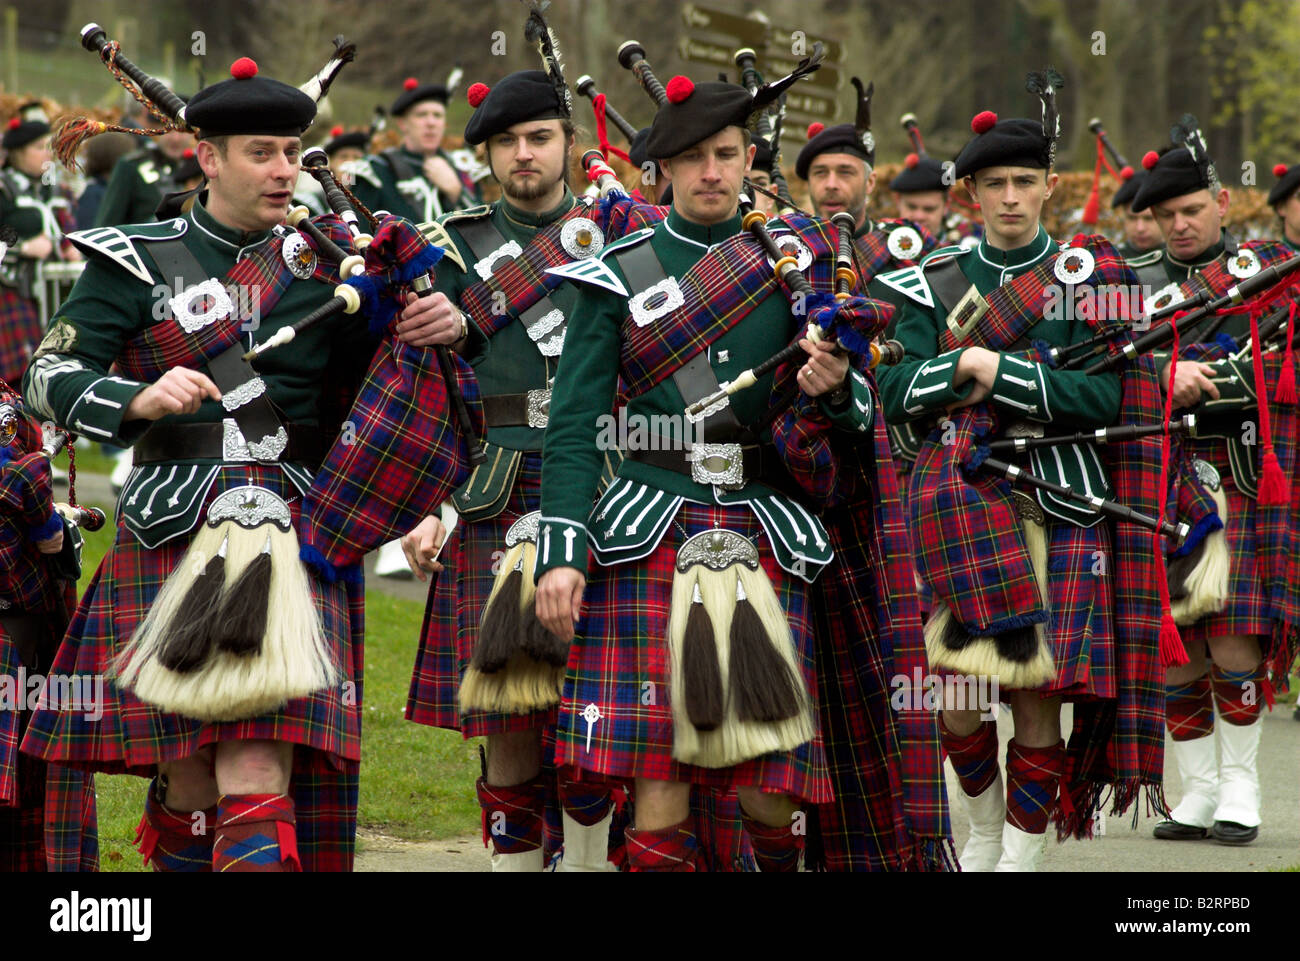 Highland pipe band performing, Ayrshire, Scotland Banque D'Images